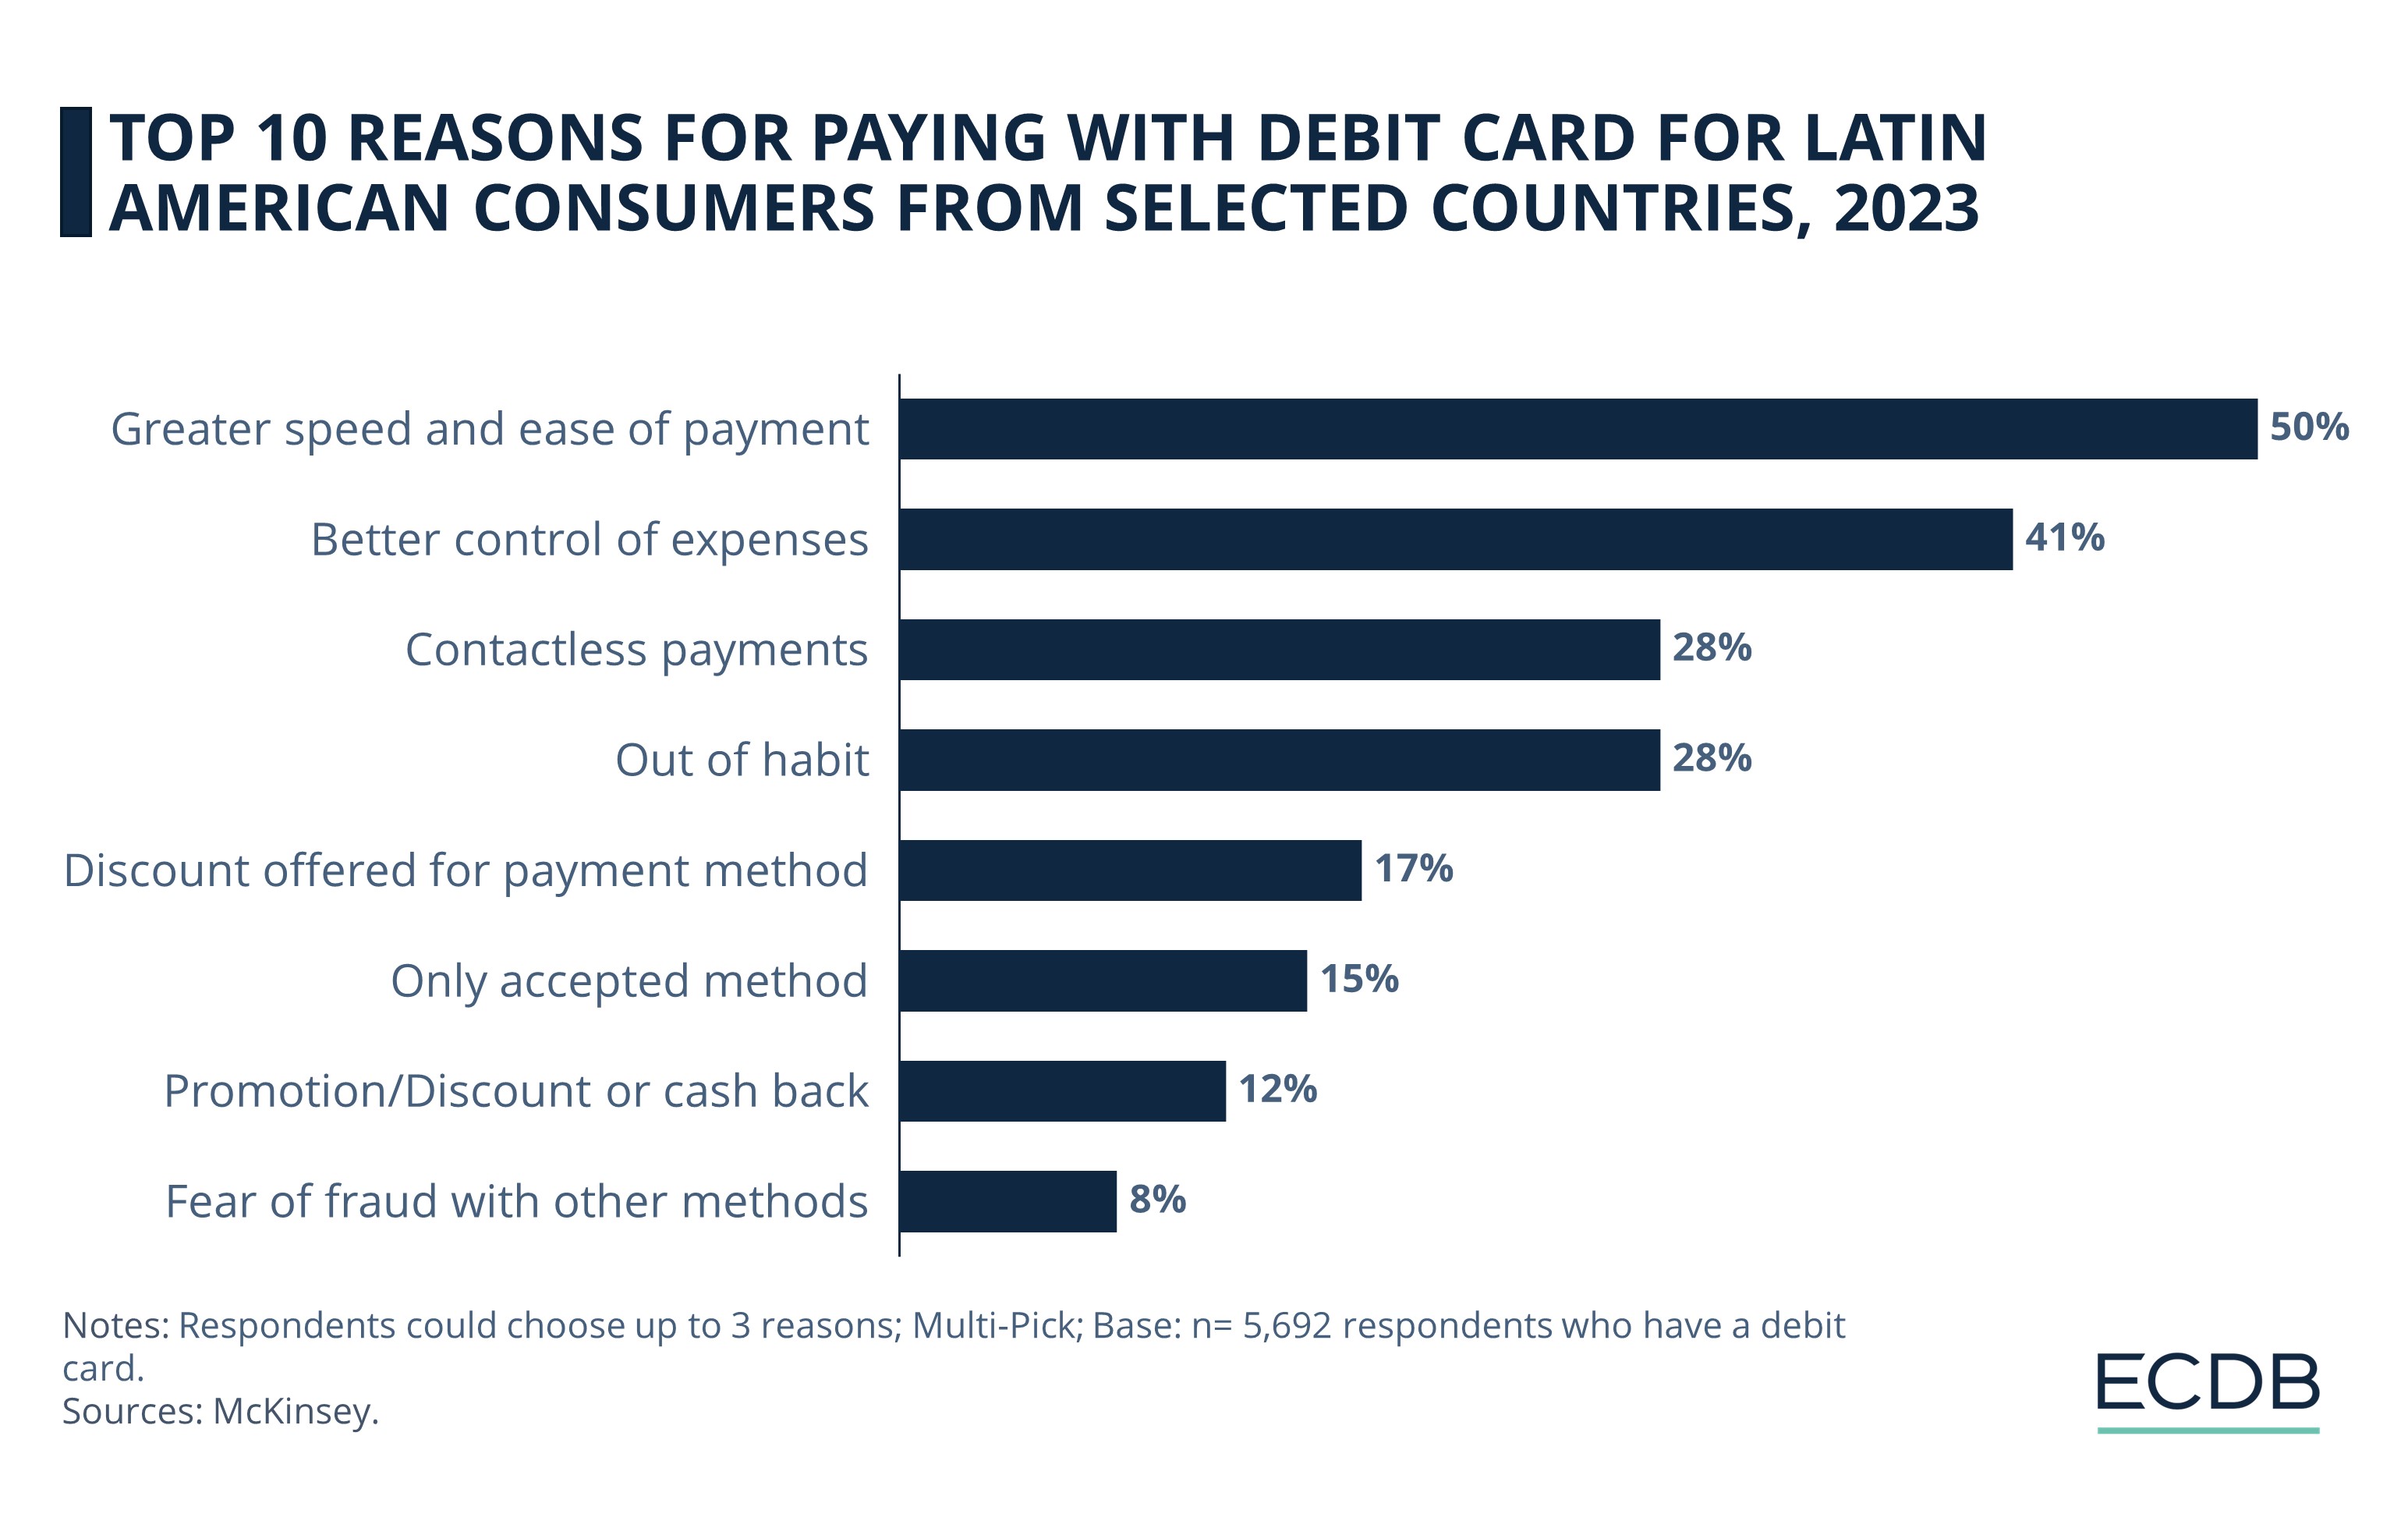 Top 10 Reasons for Paying With Debit Card For Latin American Consumers From Selected Countries, 2023